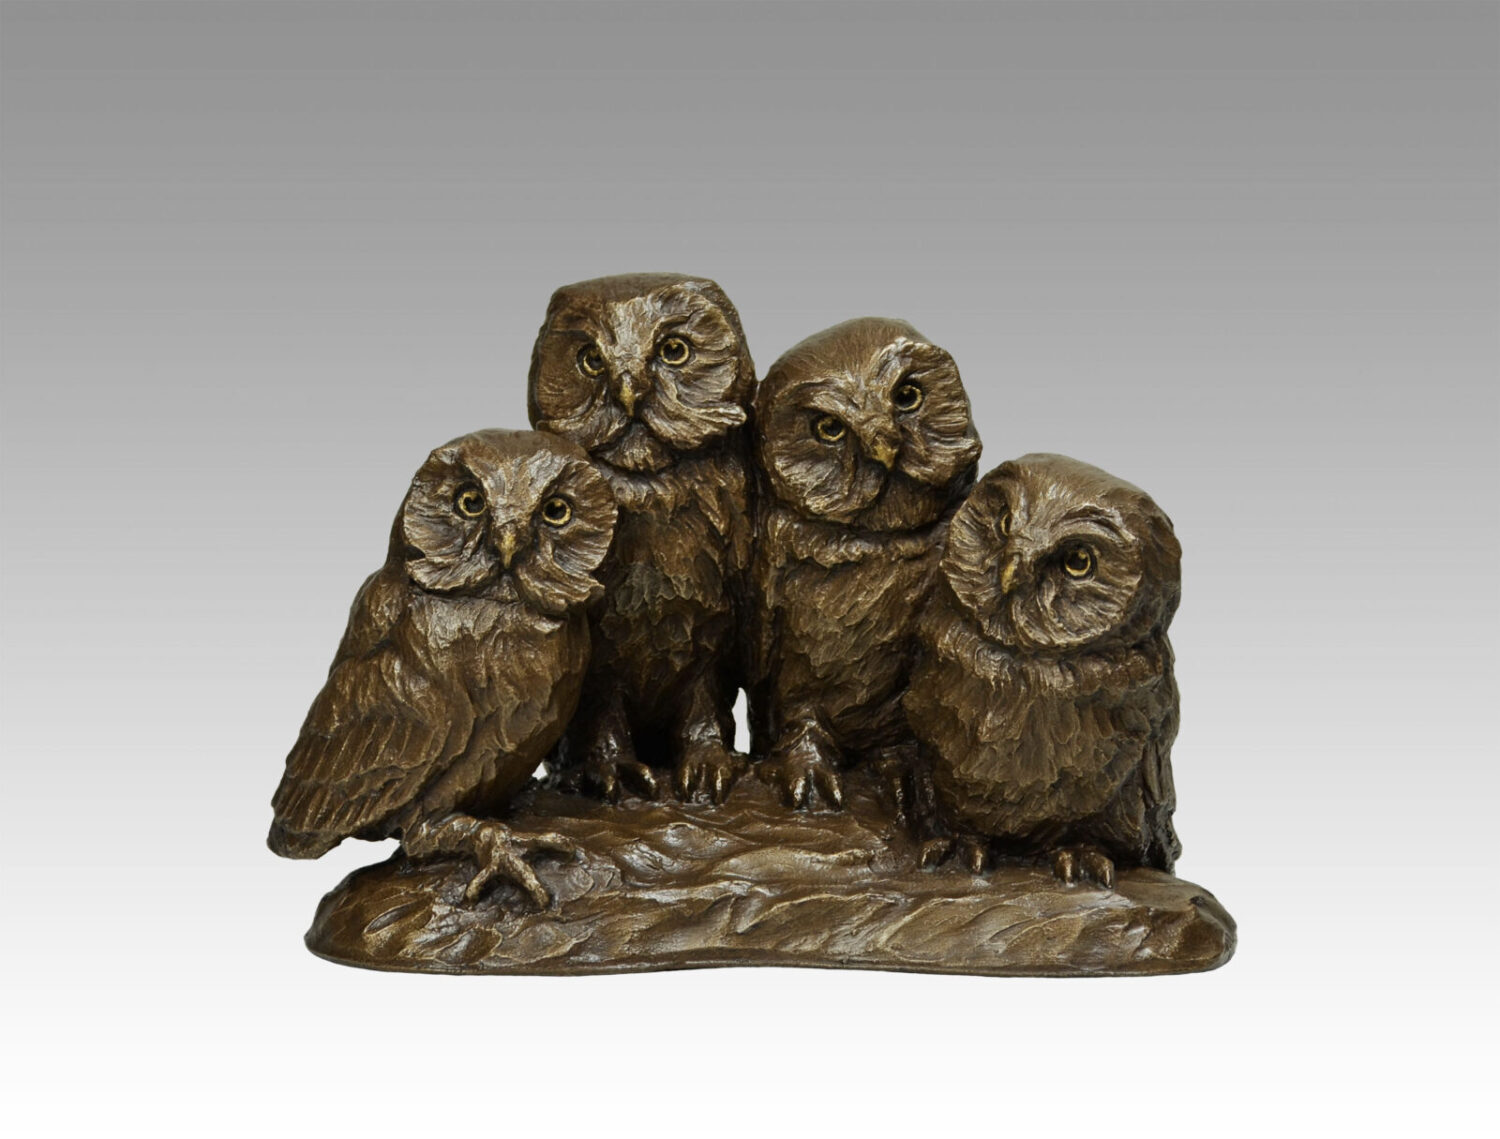 Gallery, Saw-Whet Quartet, $500 CAD, Metal Infused, 11" L, Edition 60, Wildlife Sculpture of Four Saw-Whet Owls, Sculptor Tyler Fauvelle